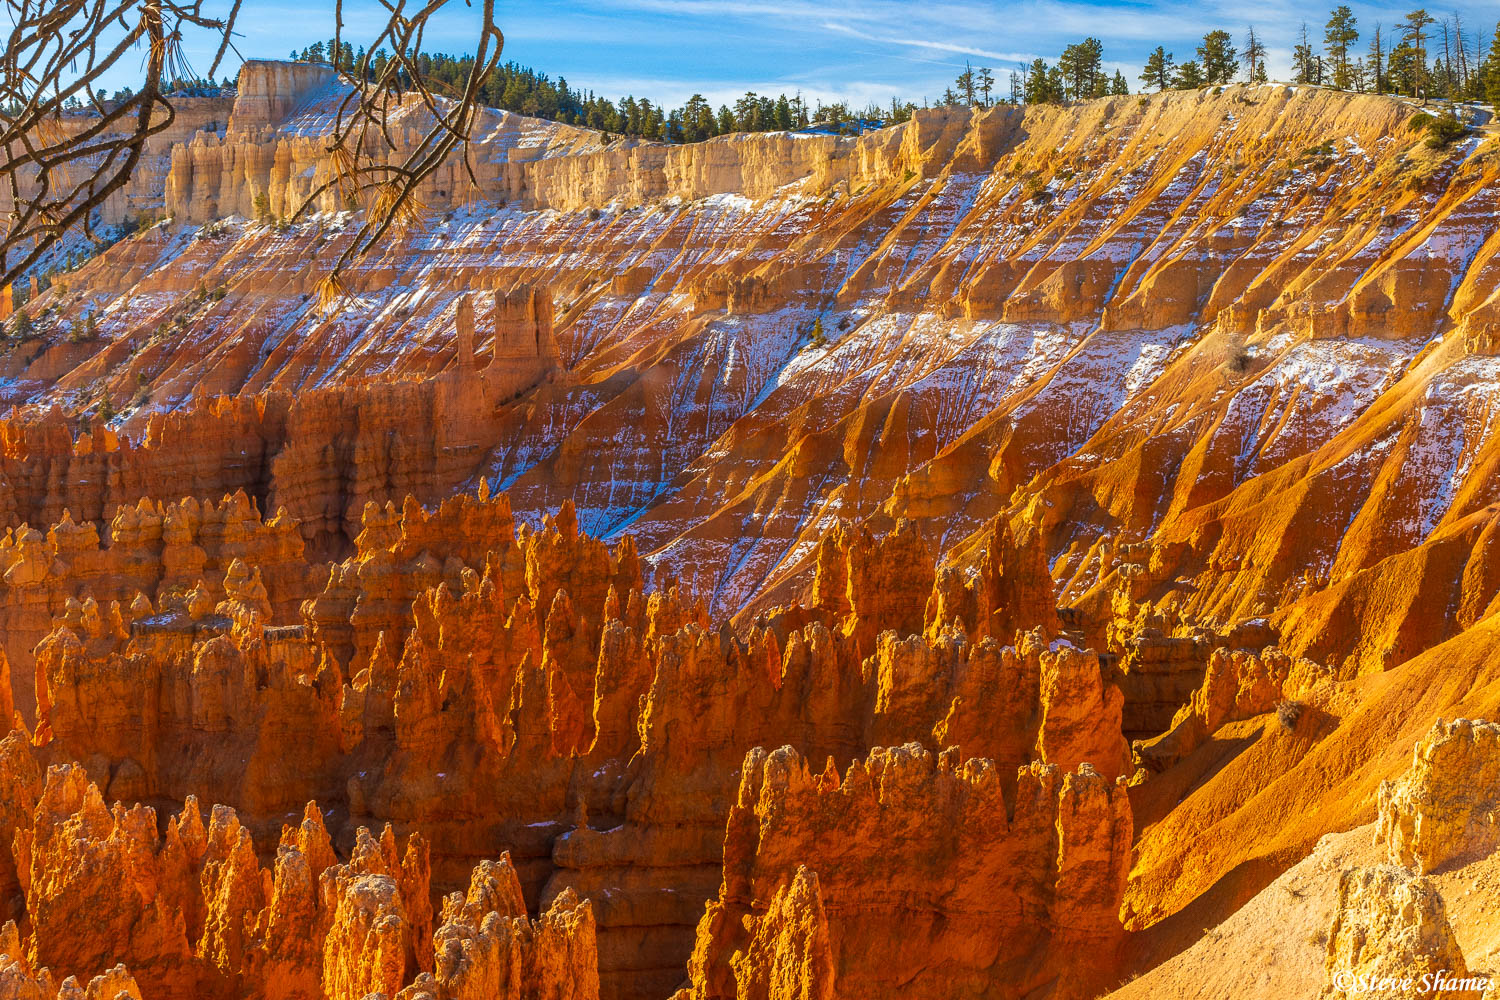 A little dusting of snow adds to the scenery here at Bryce Canyon National Park,